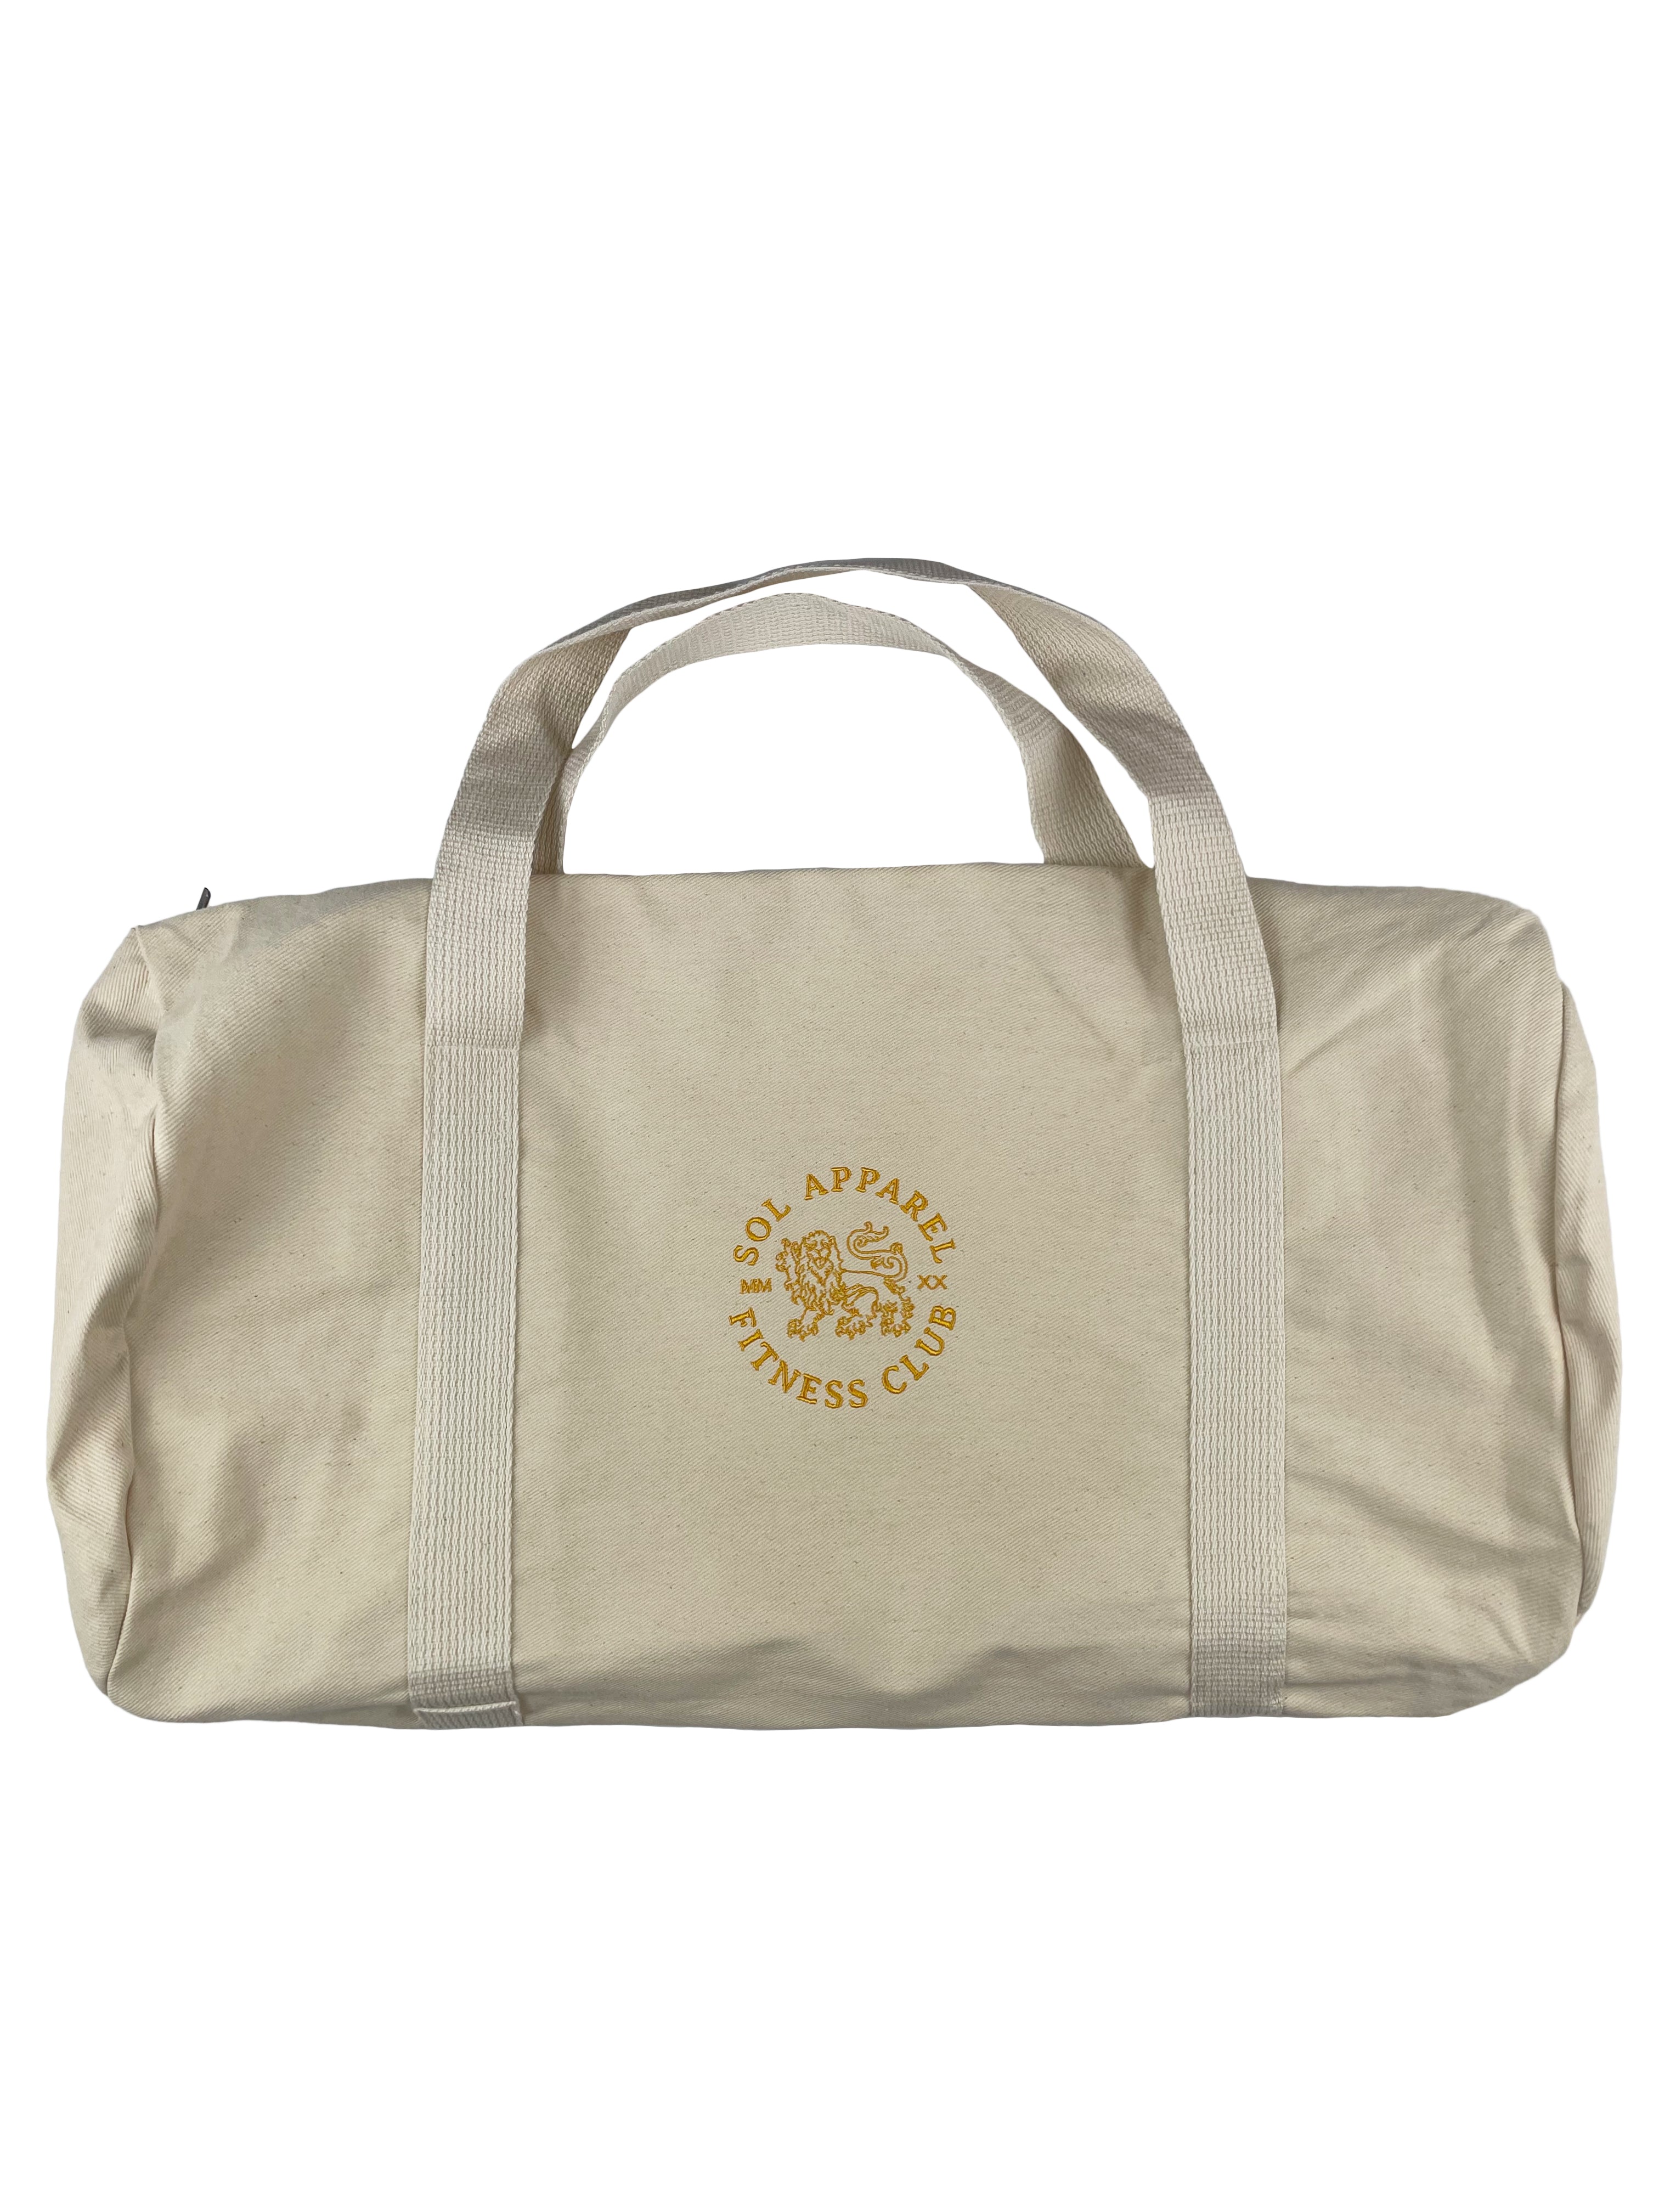 natural colored all purpose duffel bag with golden lion and text embroidered on the side